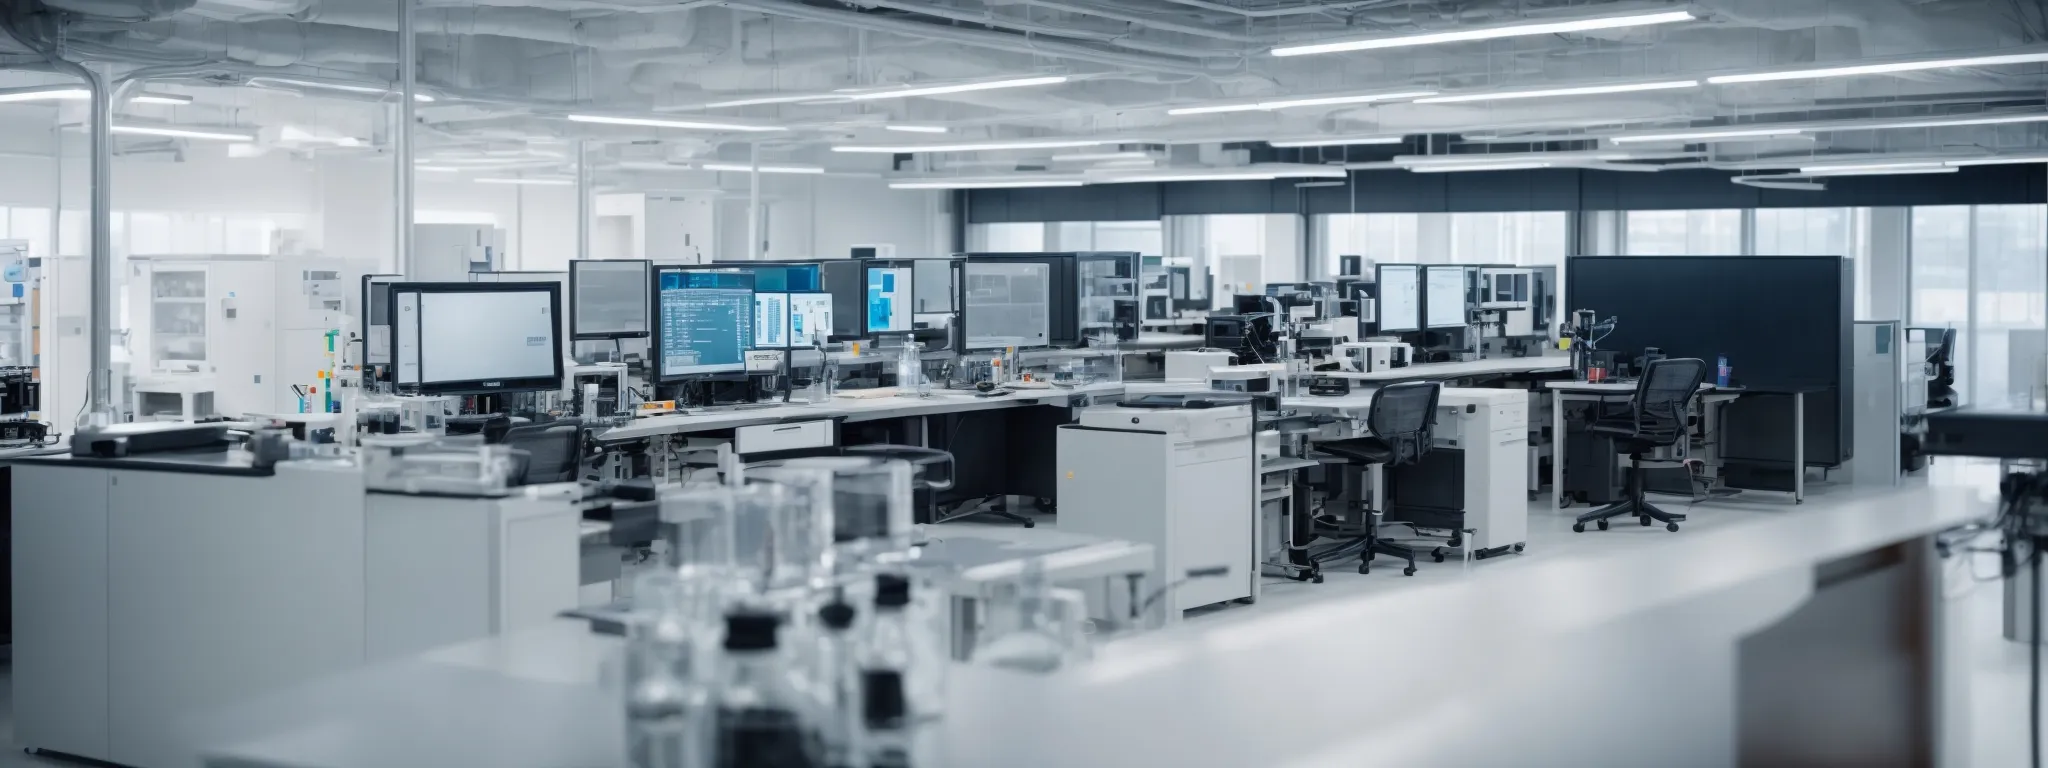 a modern laboratory with advanced computer setups where researchers collaborate on innovative technology projects.